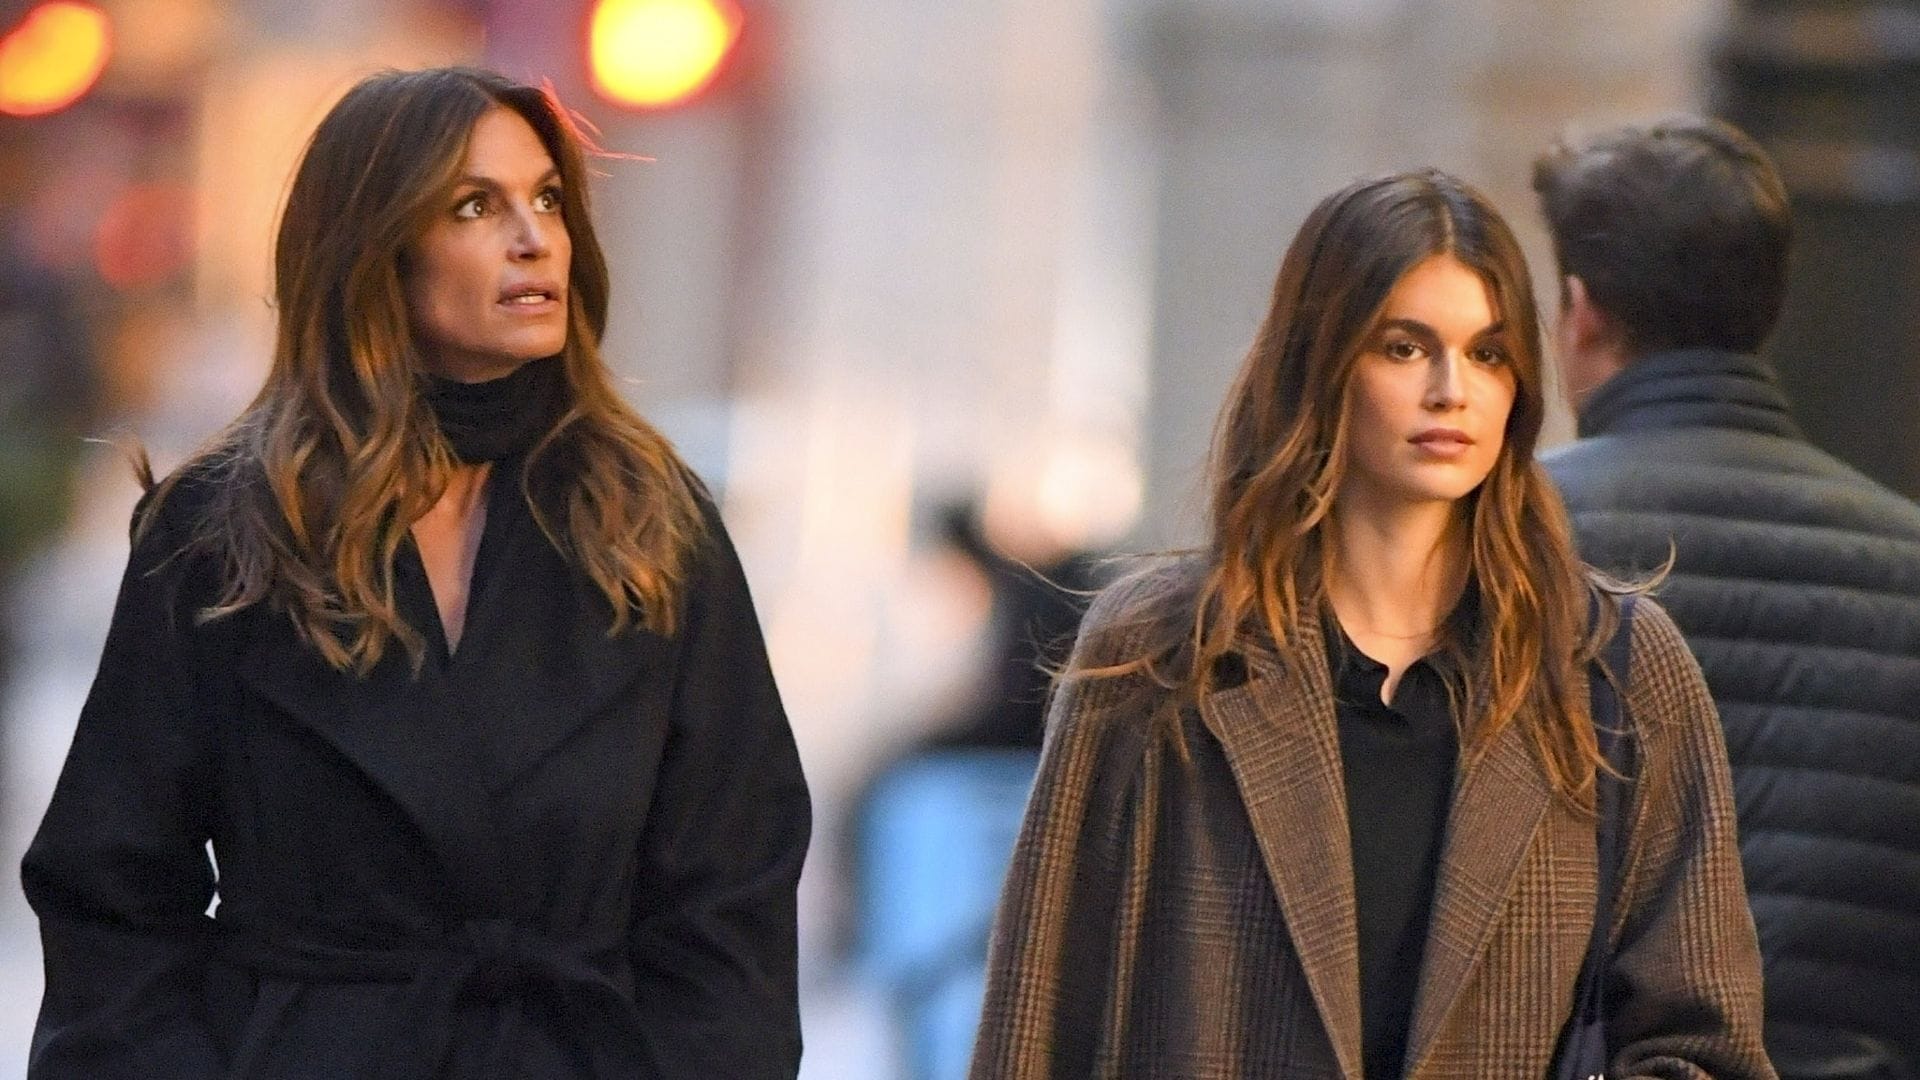 Cindy Crawford and her daughter Kaia Gerber got a head start on Christmas shopping. They were seen on a mother-daughter afternoon walking through the best stores in SoHo. The couple bundled up for the outing, with Cindy in all black and Kaia in a $3,400 Ralph Lauren Karima plaid coat.